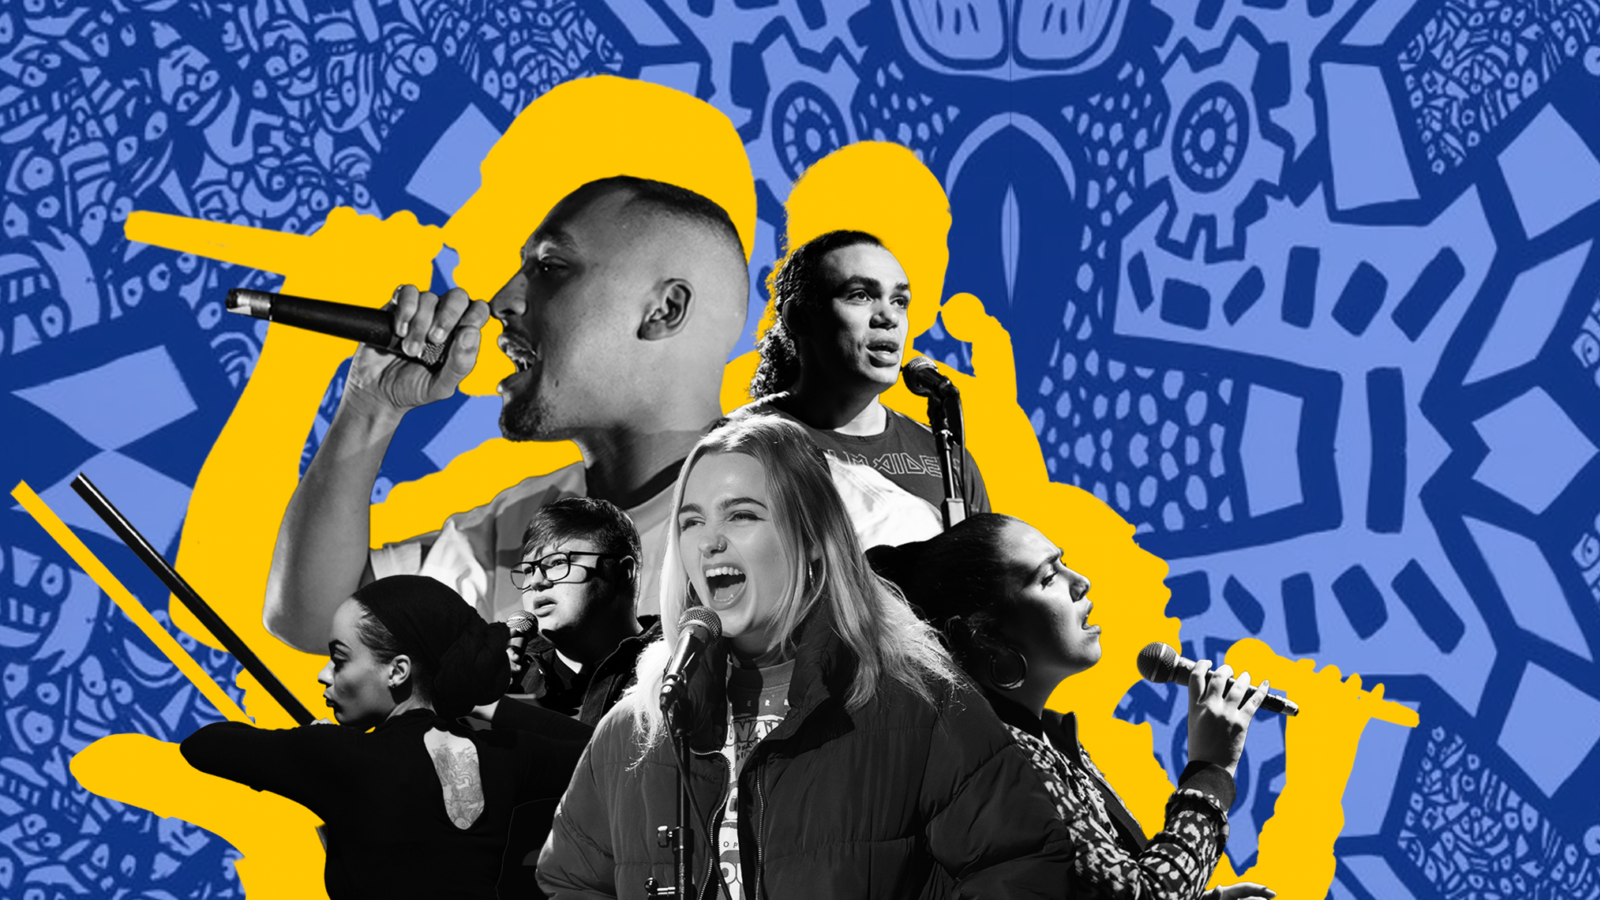 Black and white images of the artists performing, with a digitally made silhouette on a blue abstract patterned background.